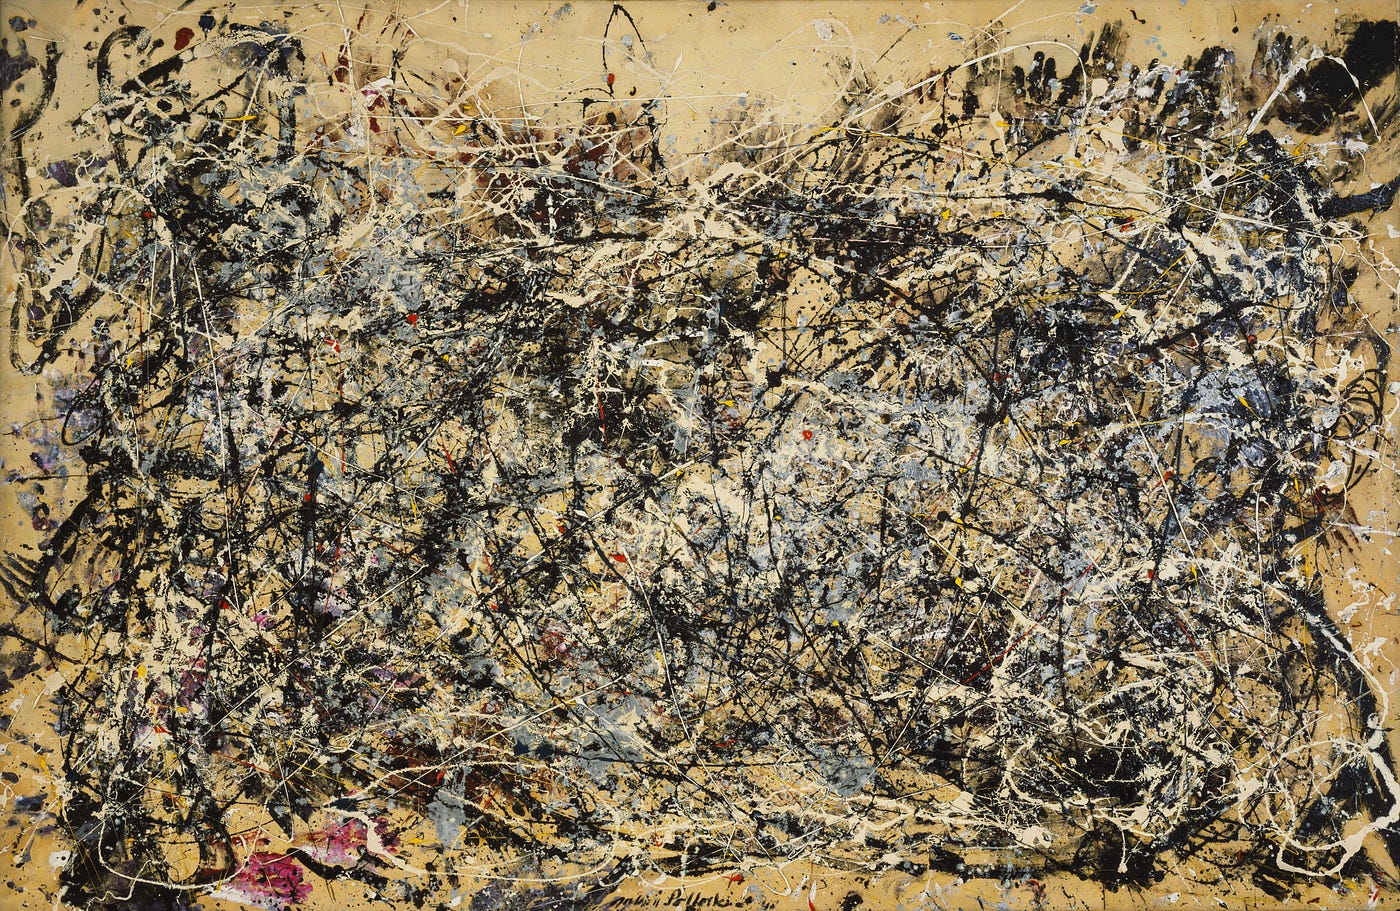 Paints, Canvas, Action!. The large abstracts of Jackson Pollock 